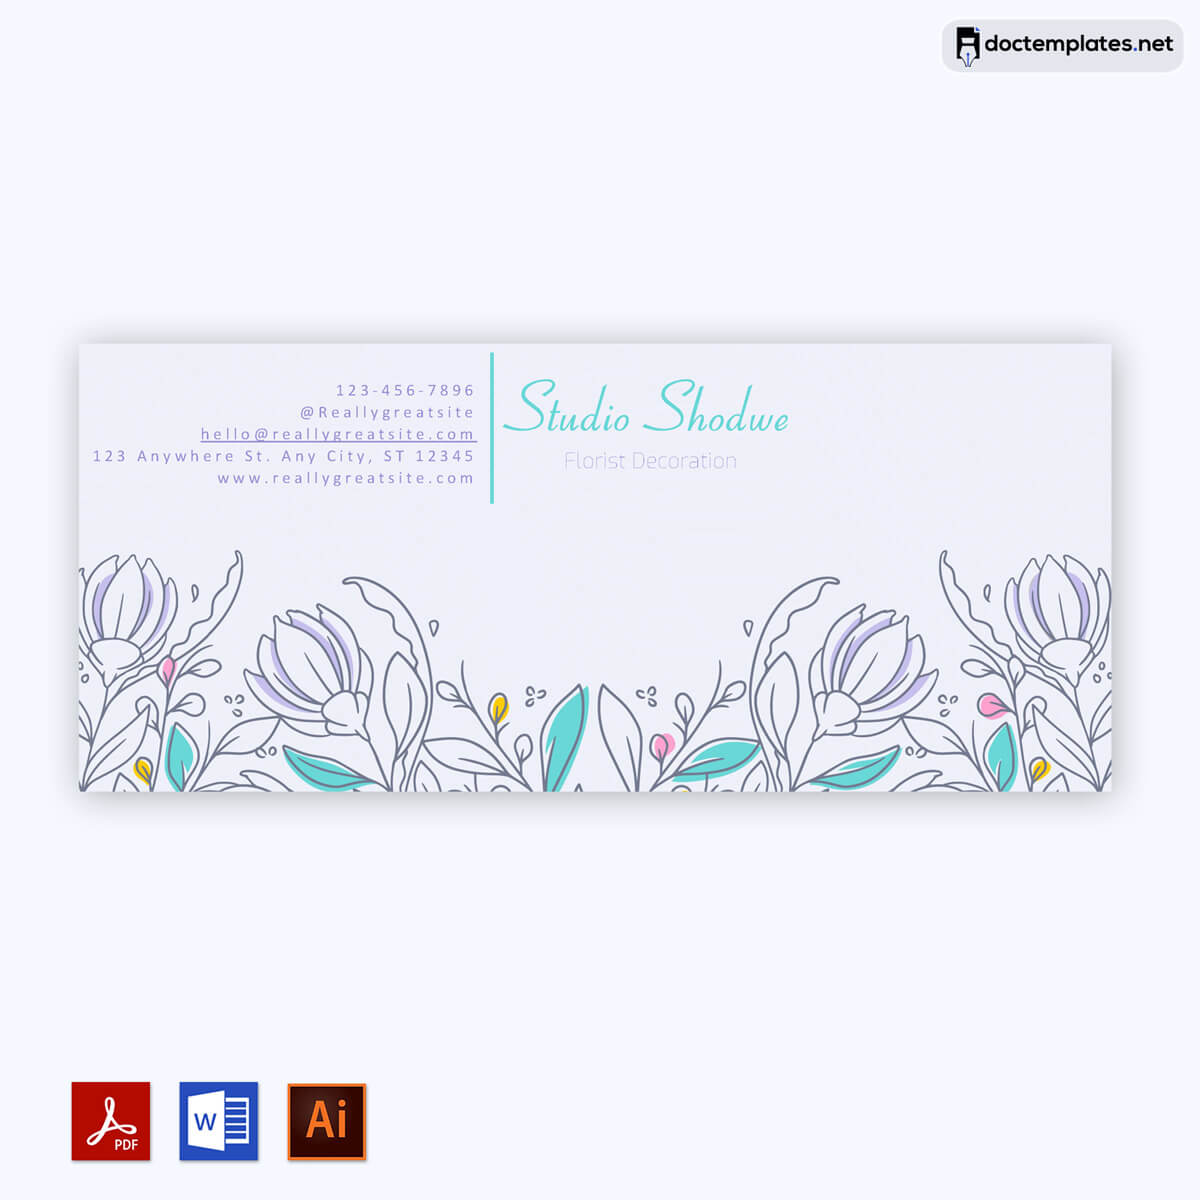 company envelope design template free download